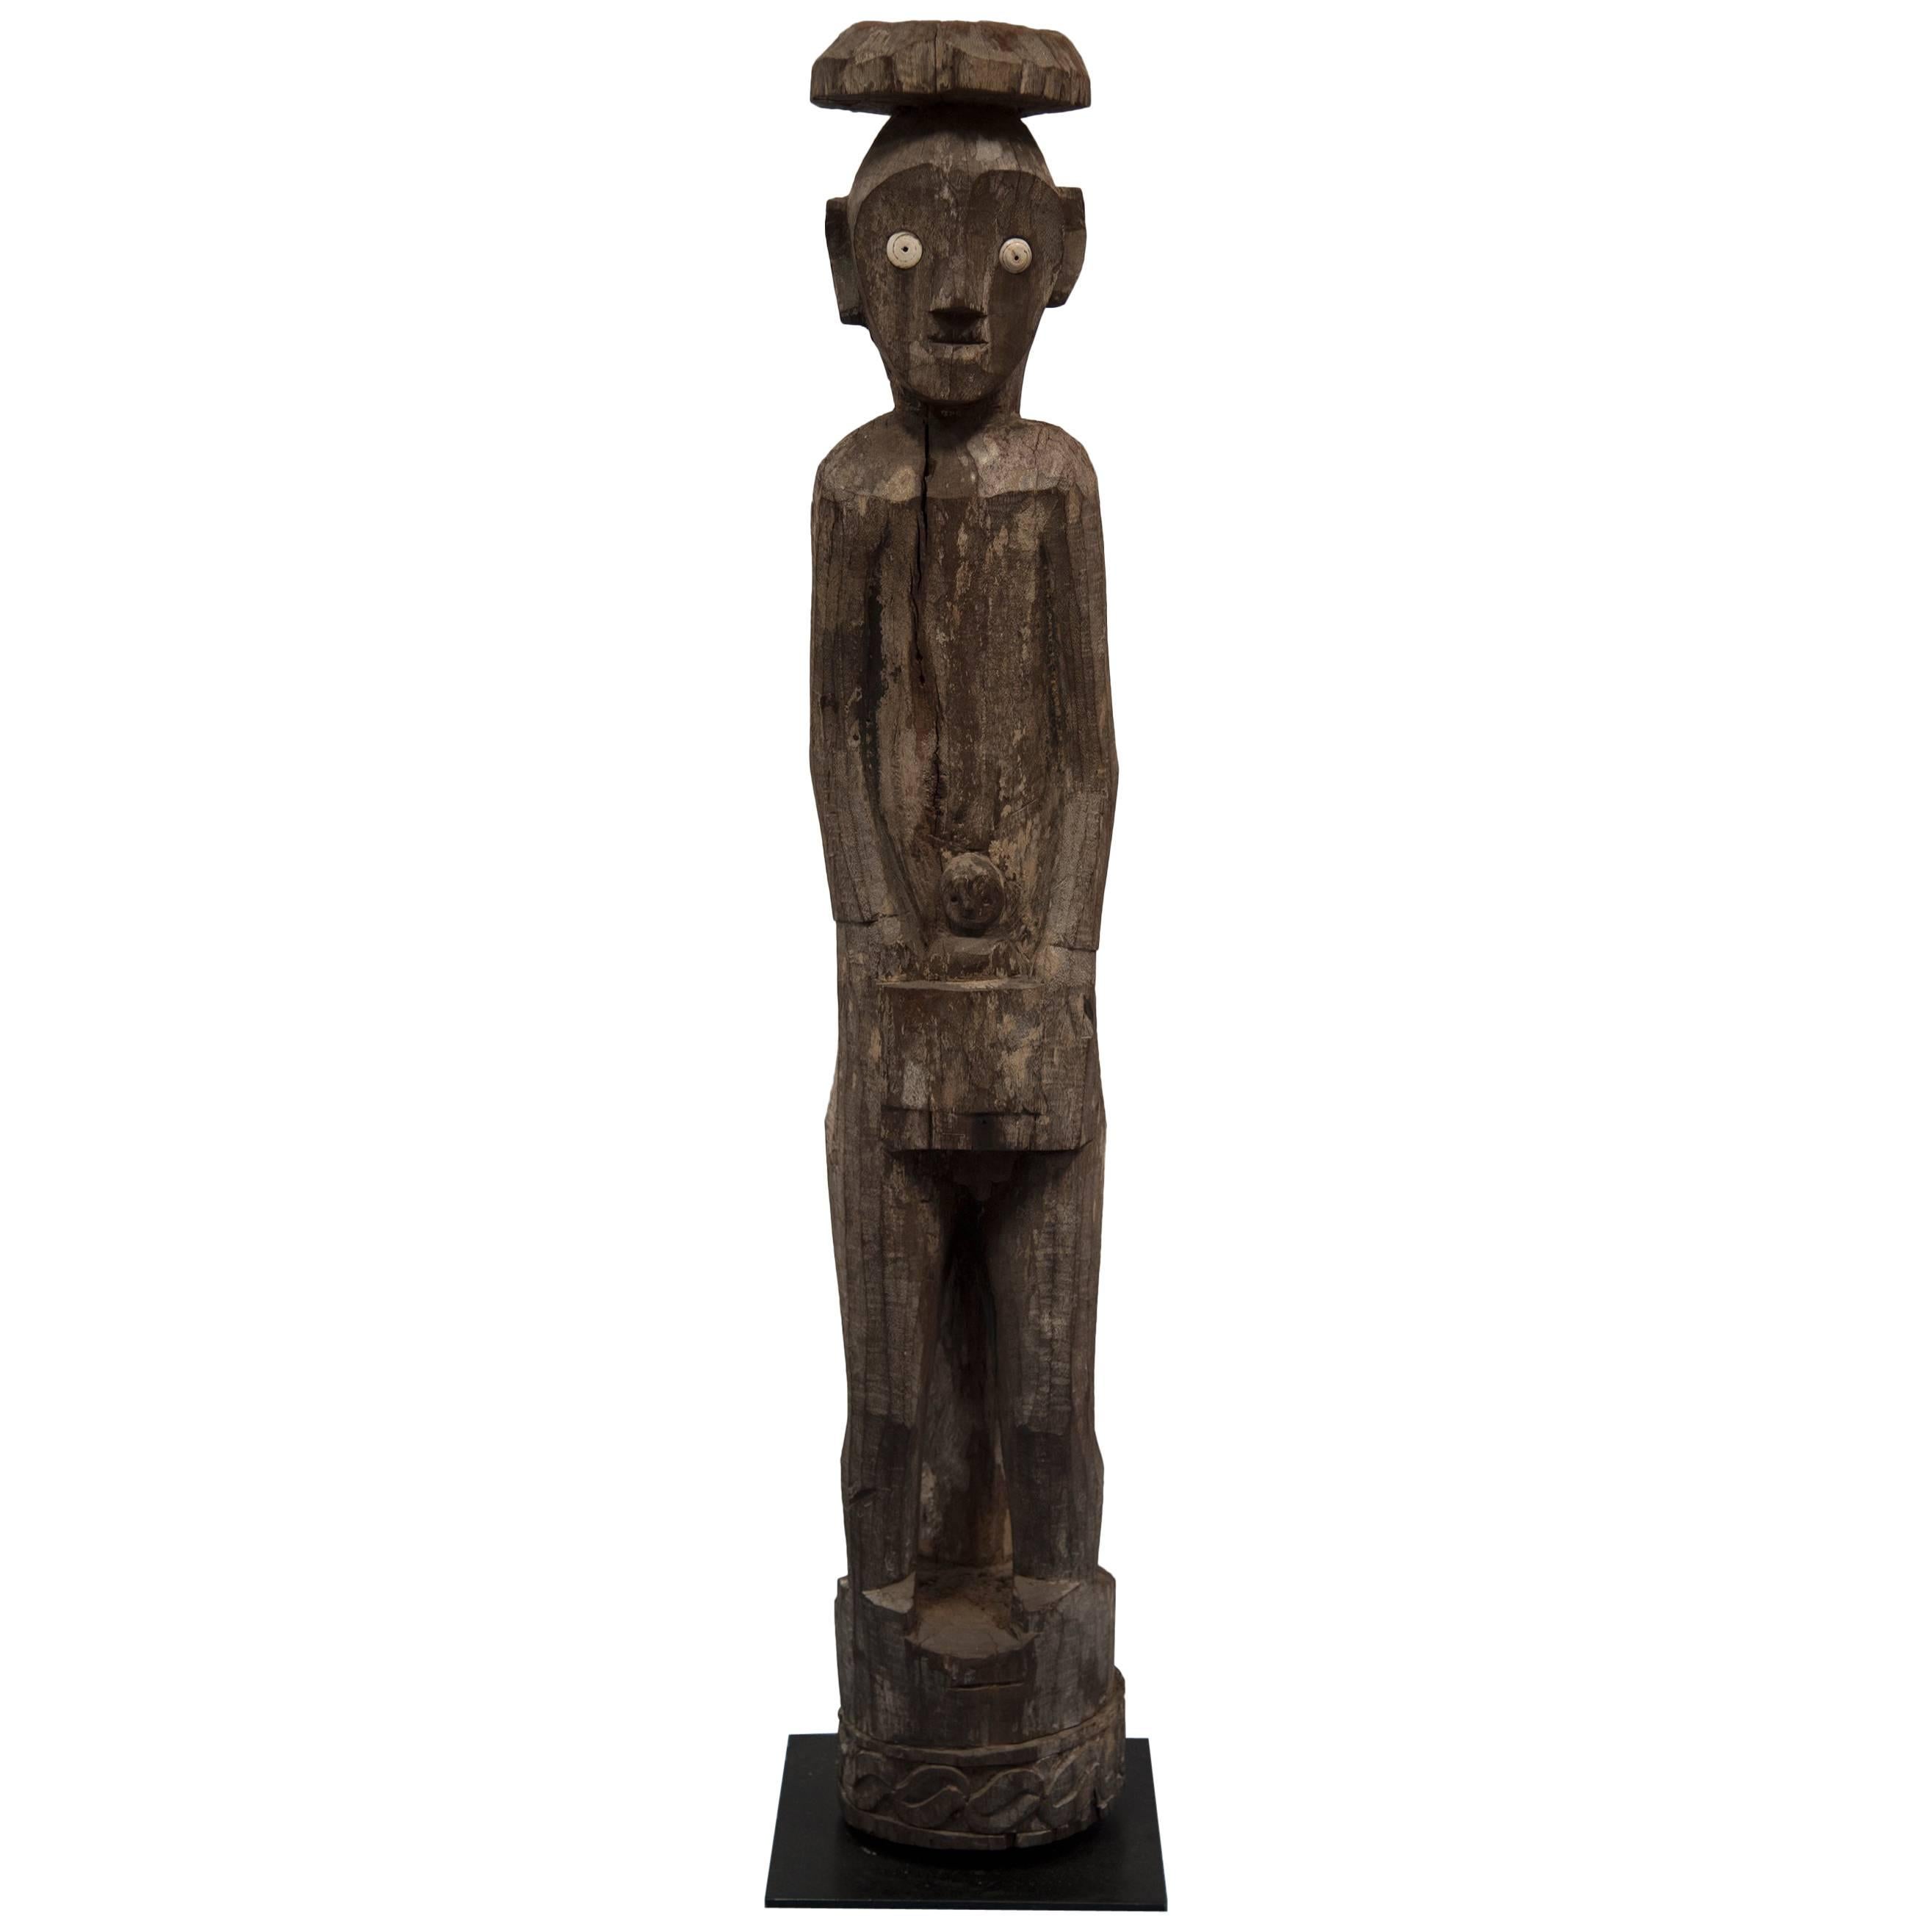 A carved wooden figure of Maile with child. A Hampadong Kalimantan carved standing sculpture by the Iban Dayak [Ot Danum Dayak] people from the interior rain forests of BORNEO. An exceptionally rare hardwood and shell inlays carved with a beautiful